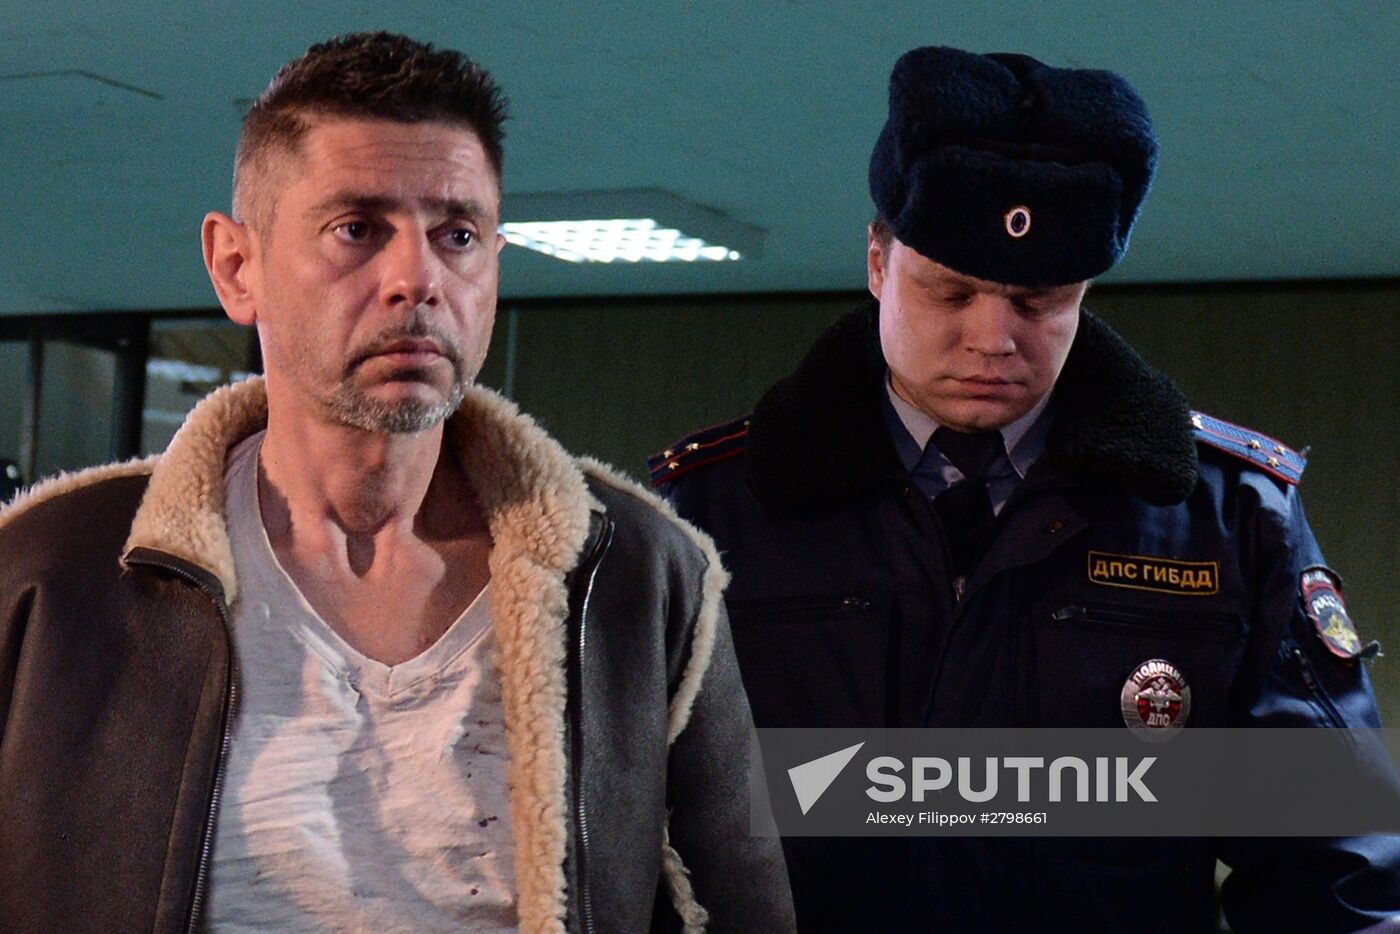 Court hearings on numerous traffic accidents by actor Valery Nikolayev